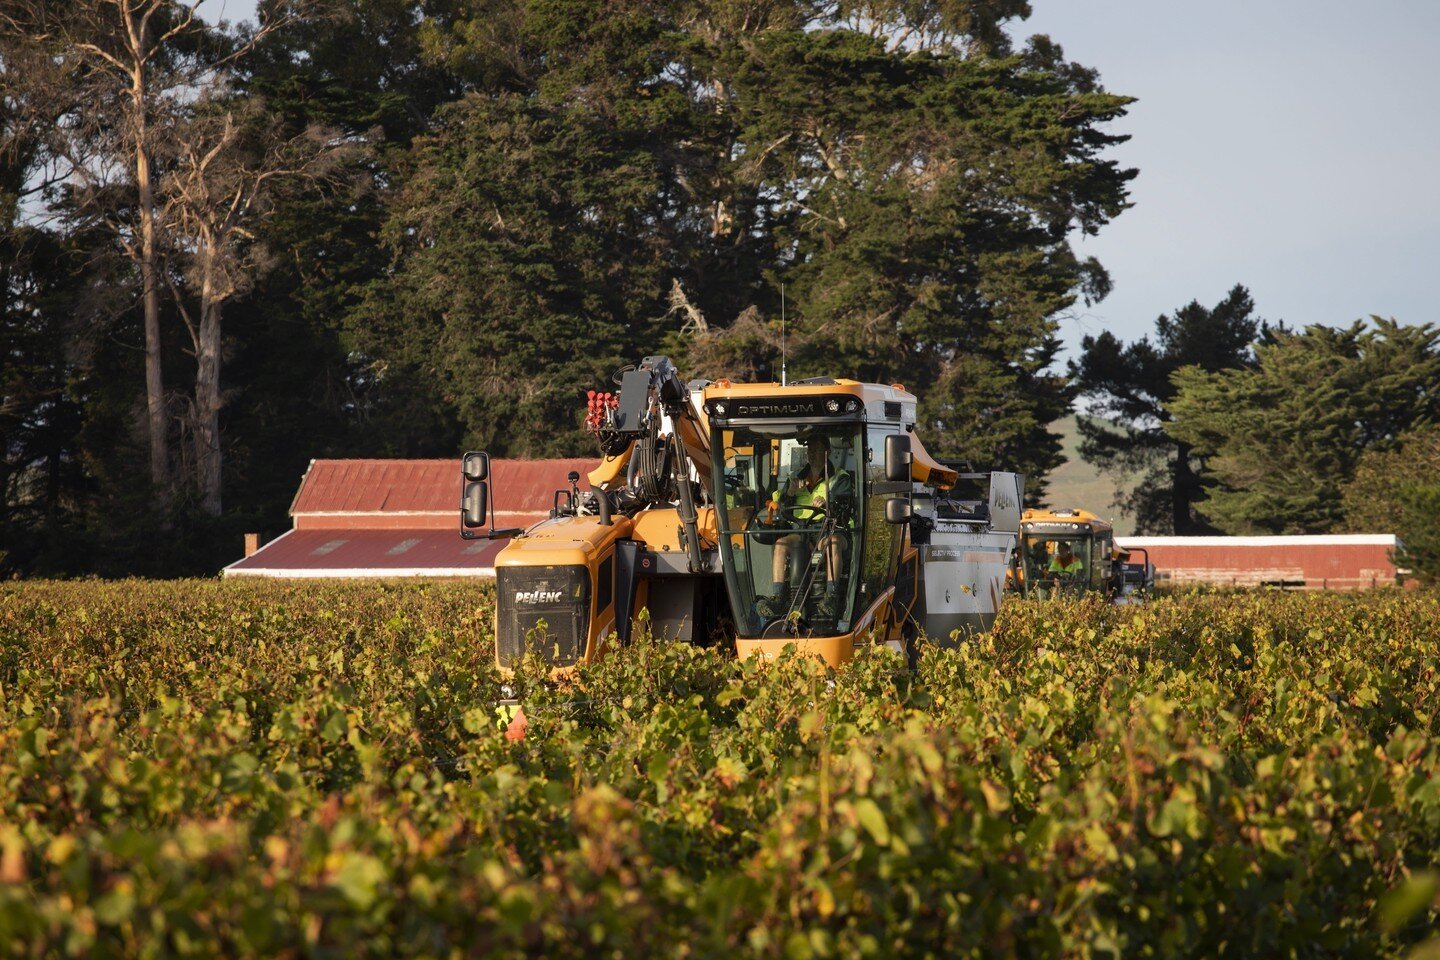 Although Harvest 2023 was a tough period for many, it will certainly be one to remember, showing the wine community doing what it does best - coming together to help each other out.

Check out the link in our bio to read Patrick Materman, Our Directo